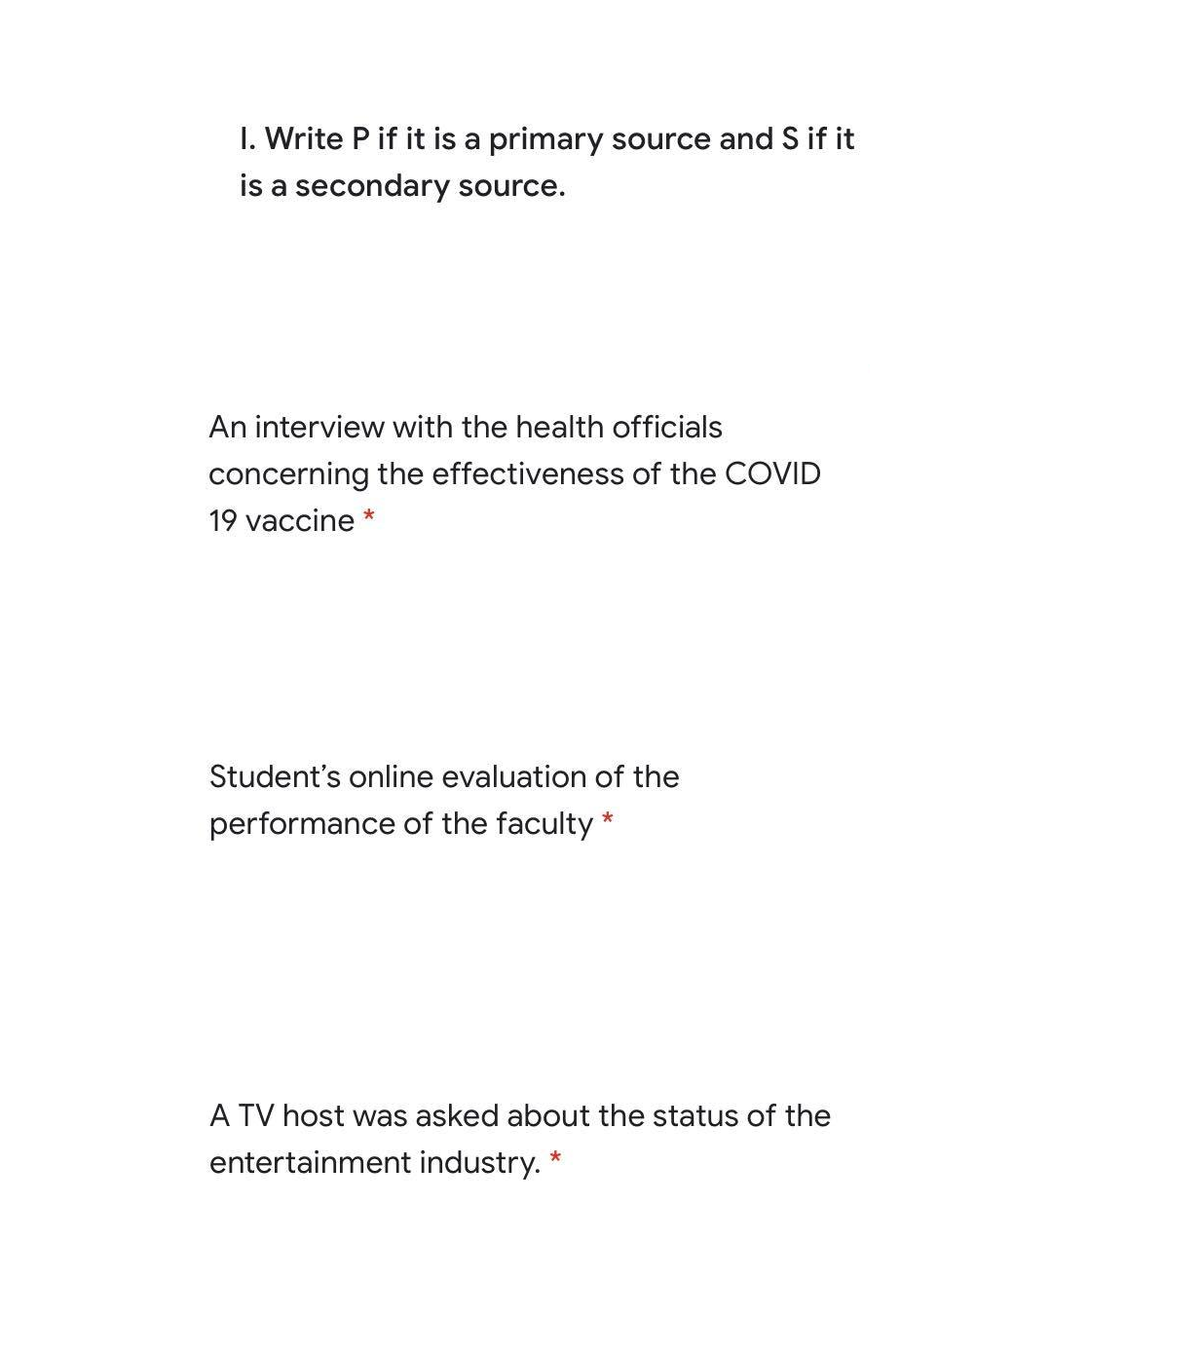 I. Write P if it is a primary source and S if it
is a secondary source.
An interview with the health officials
concerning the effectiveness of the COVID
19 vaccine *
Student's online evaluation of the
performance of the faculty *
A TV host was asked about the status of the
entertainment industry. *
